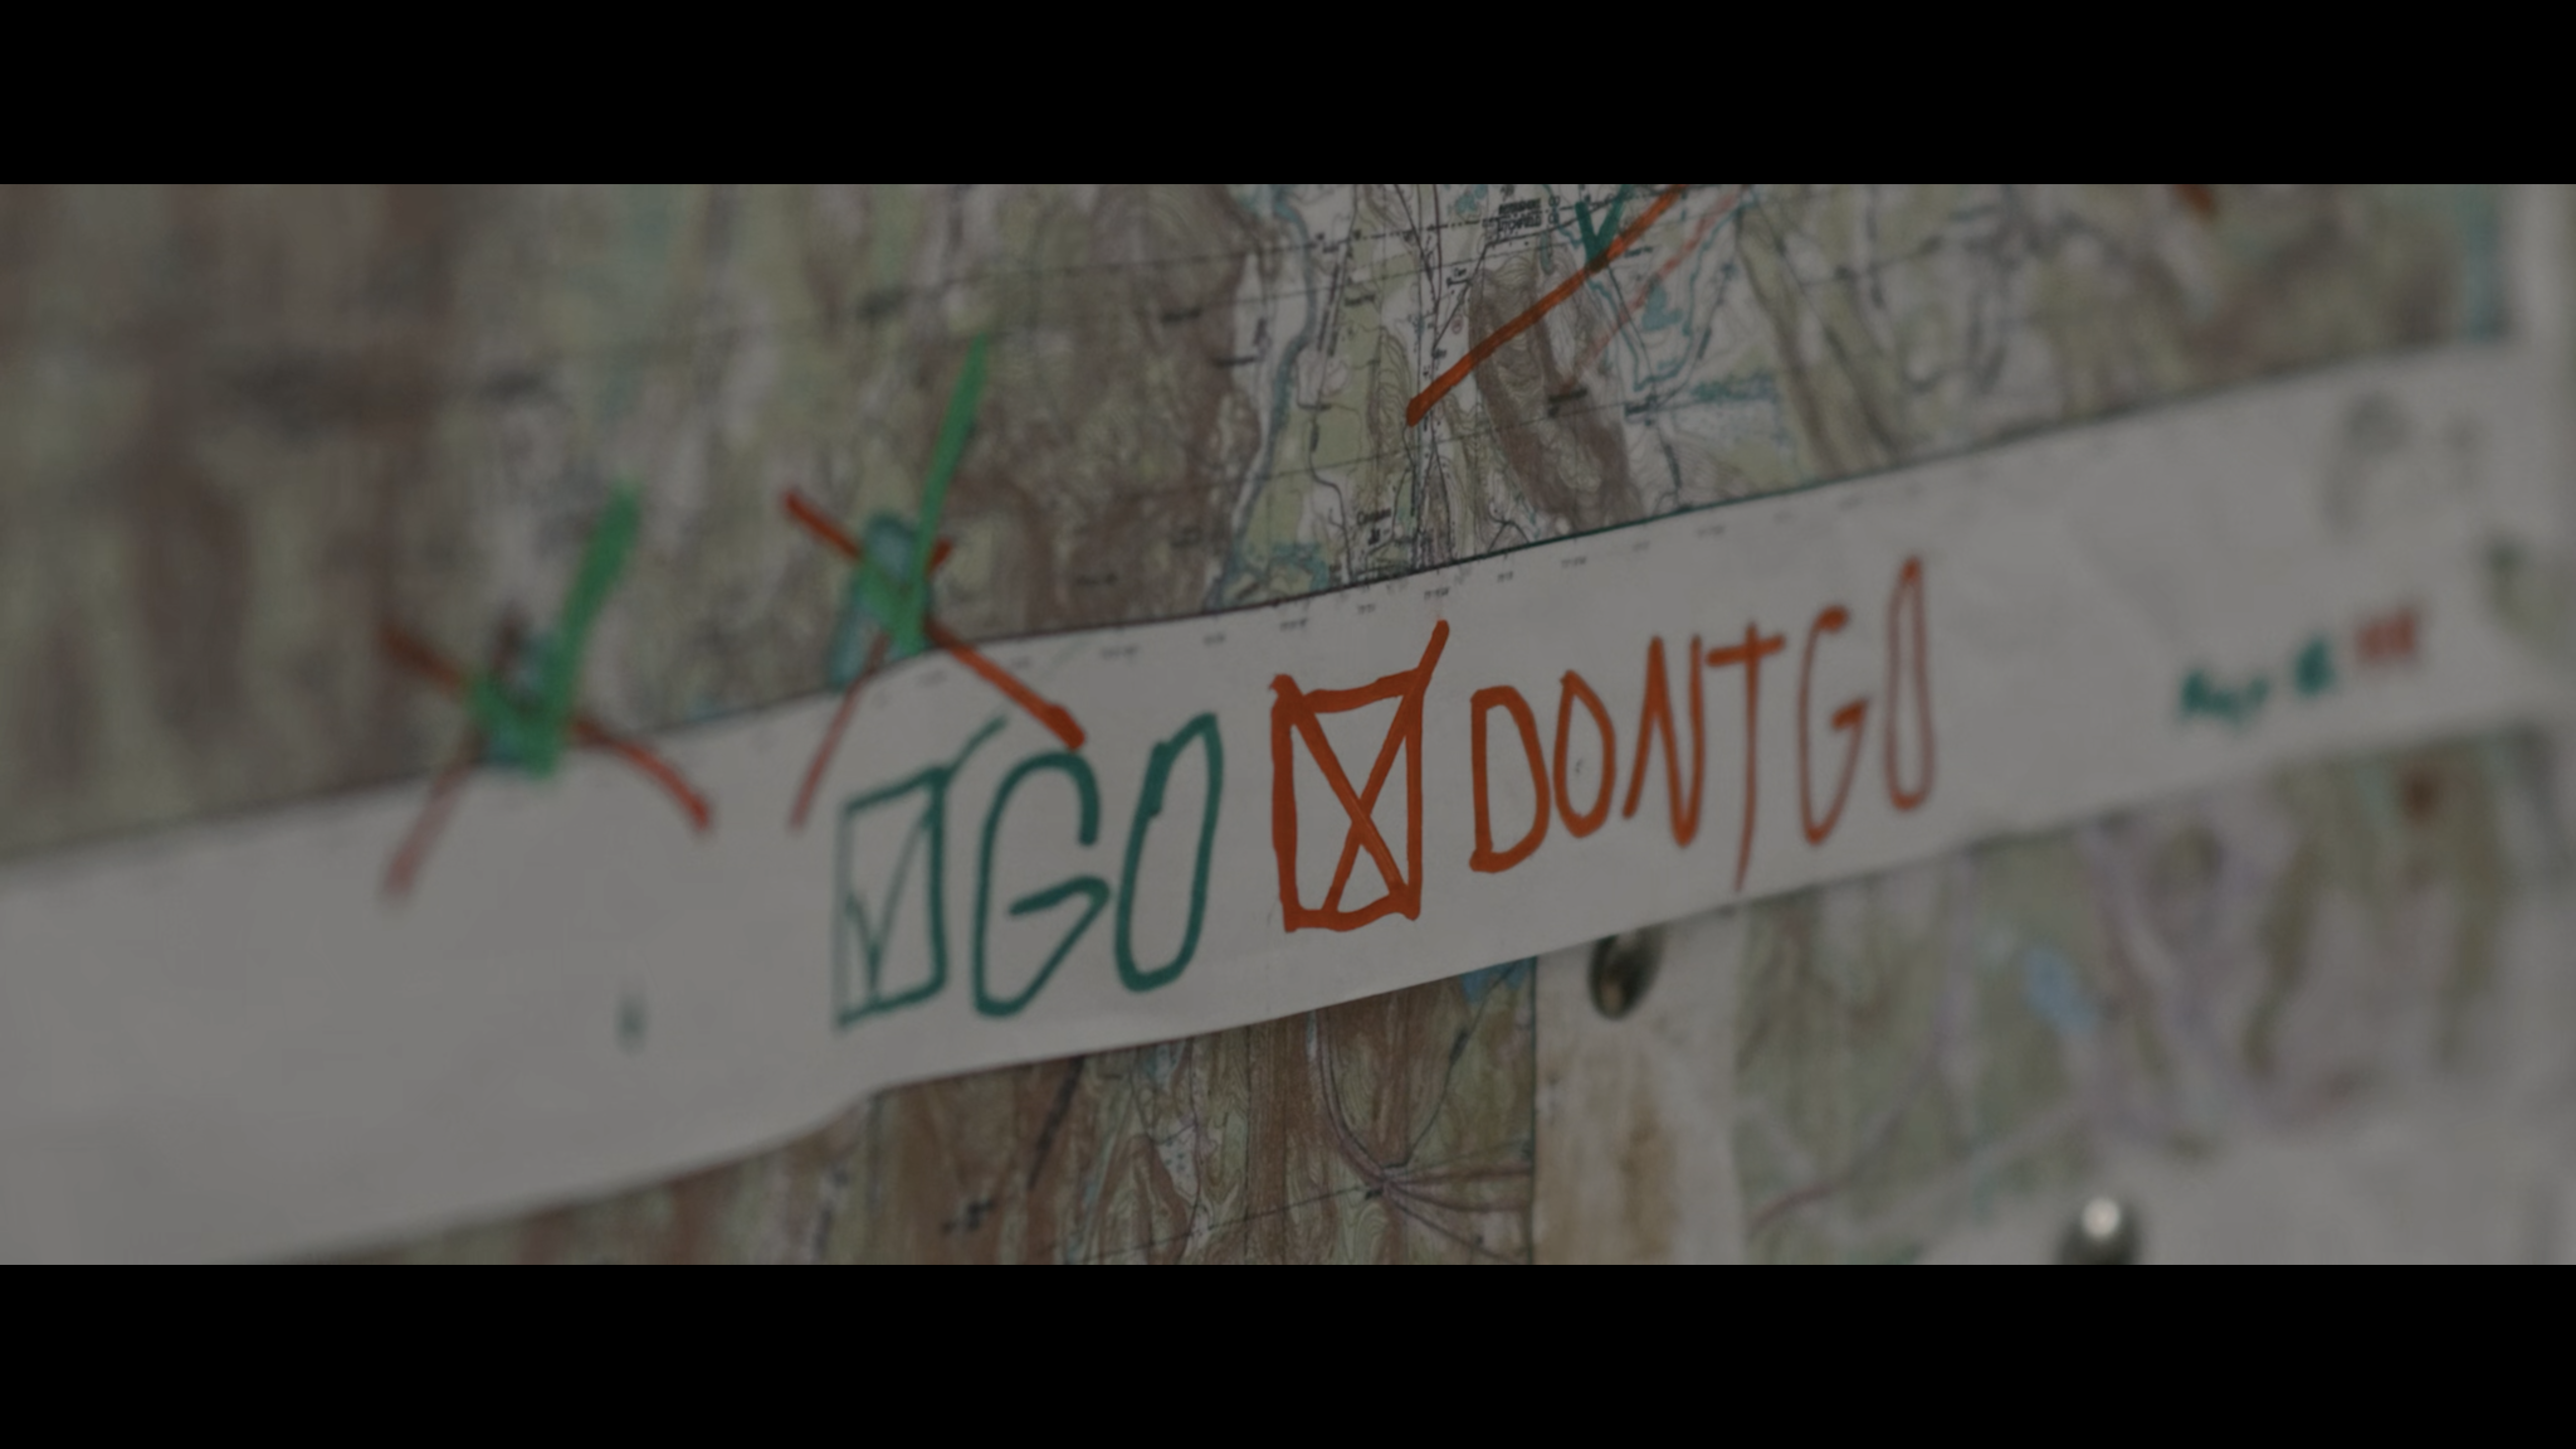 Post-Apocalyptic Psychological Thriller Trailer For The Film Go/Don’t Go